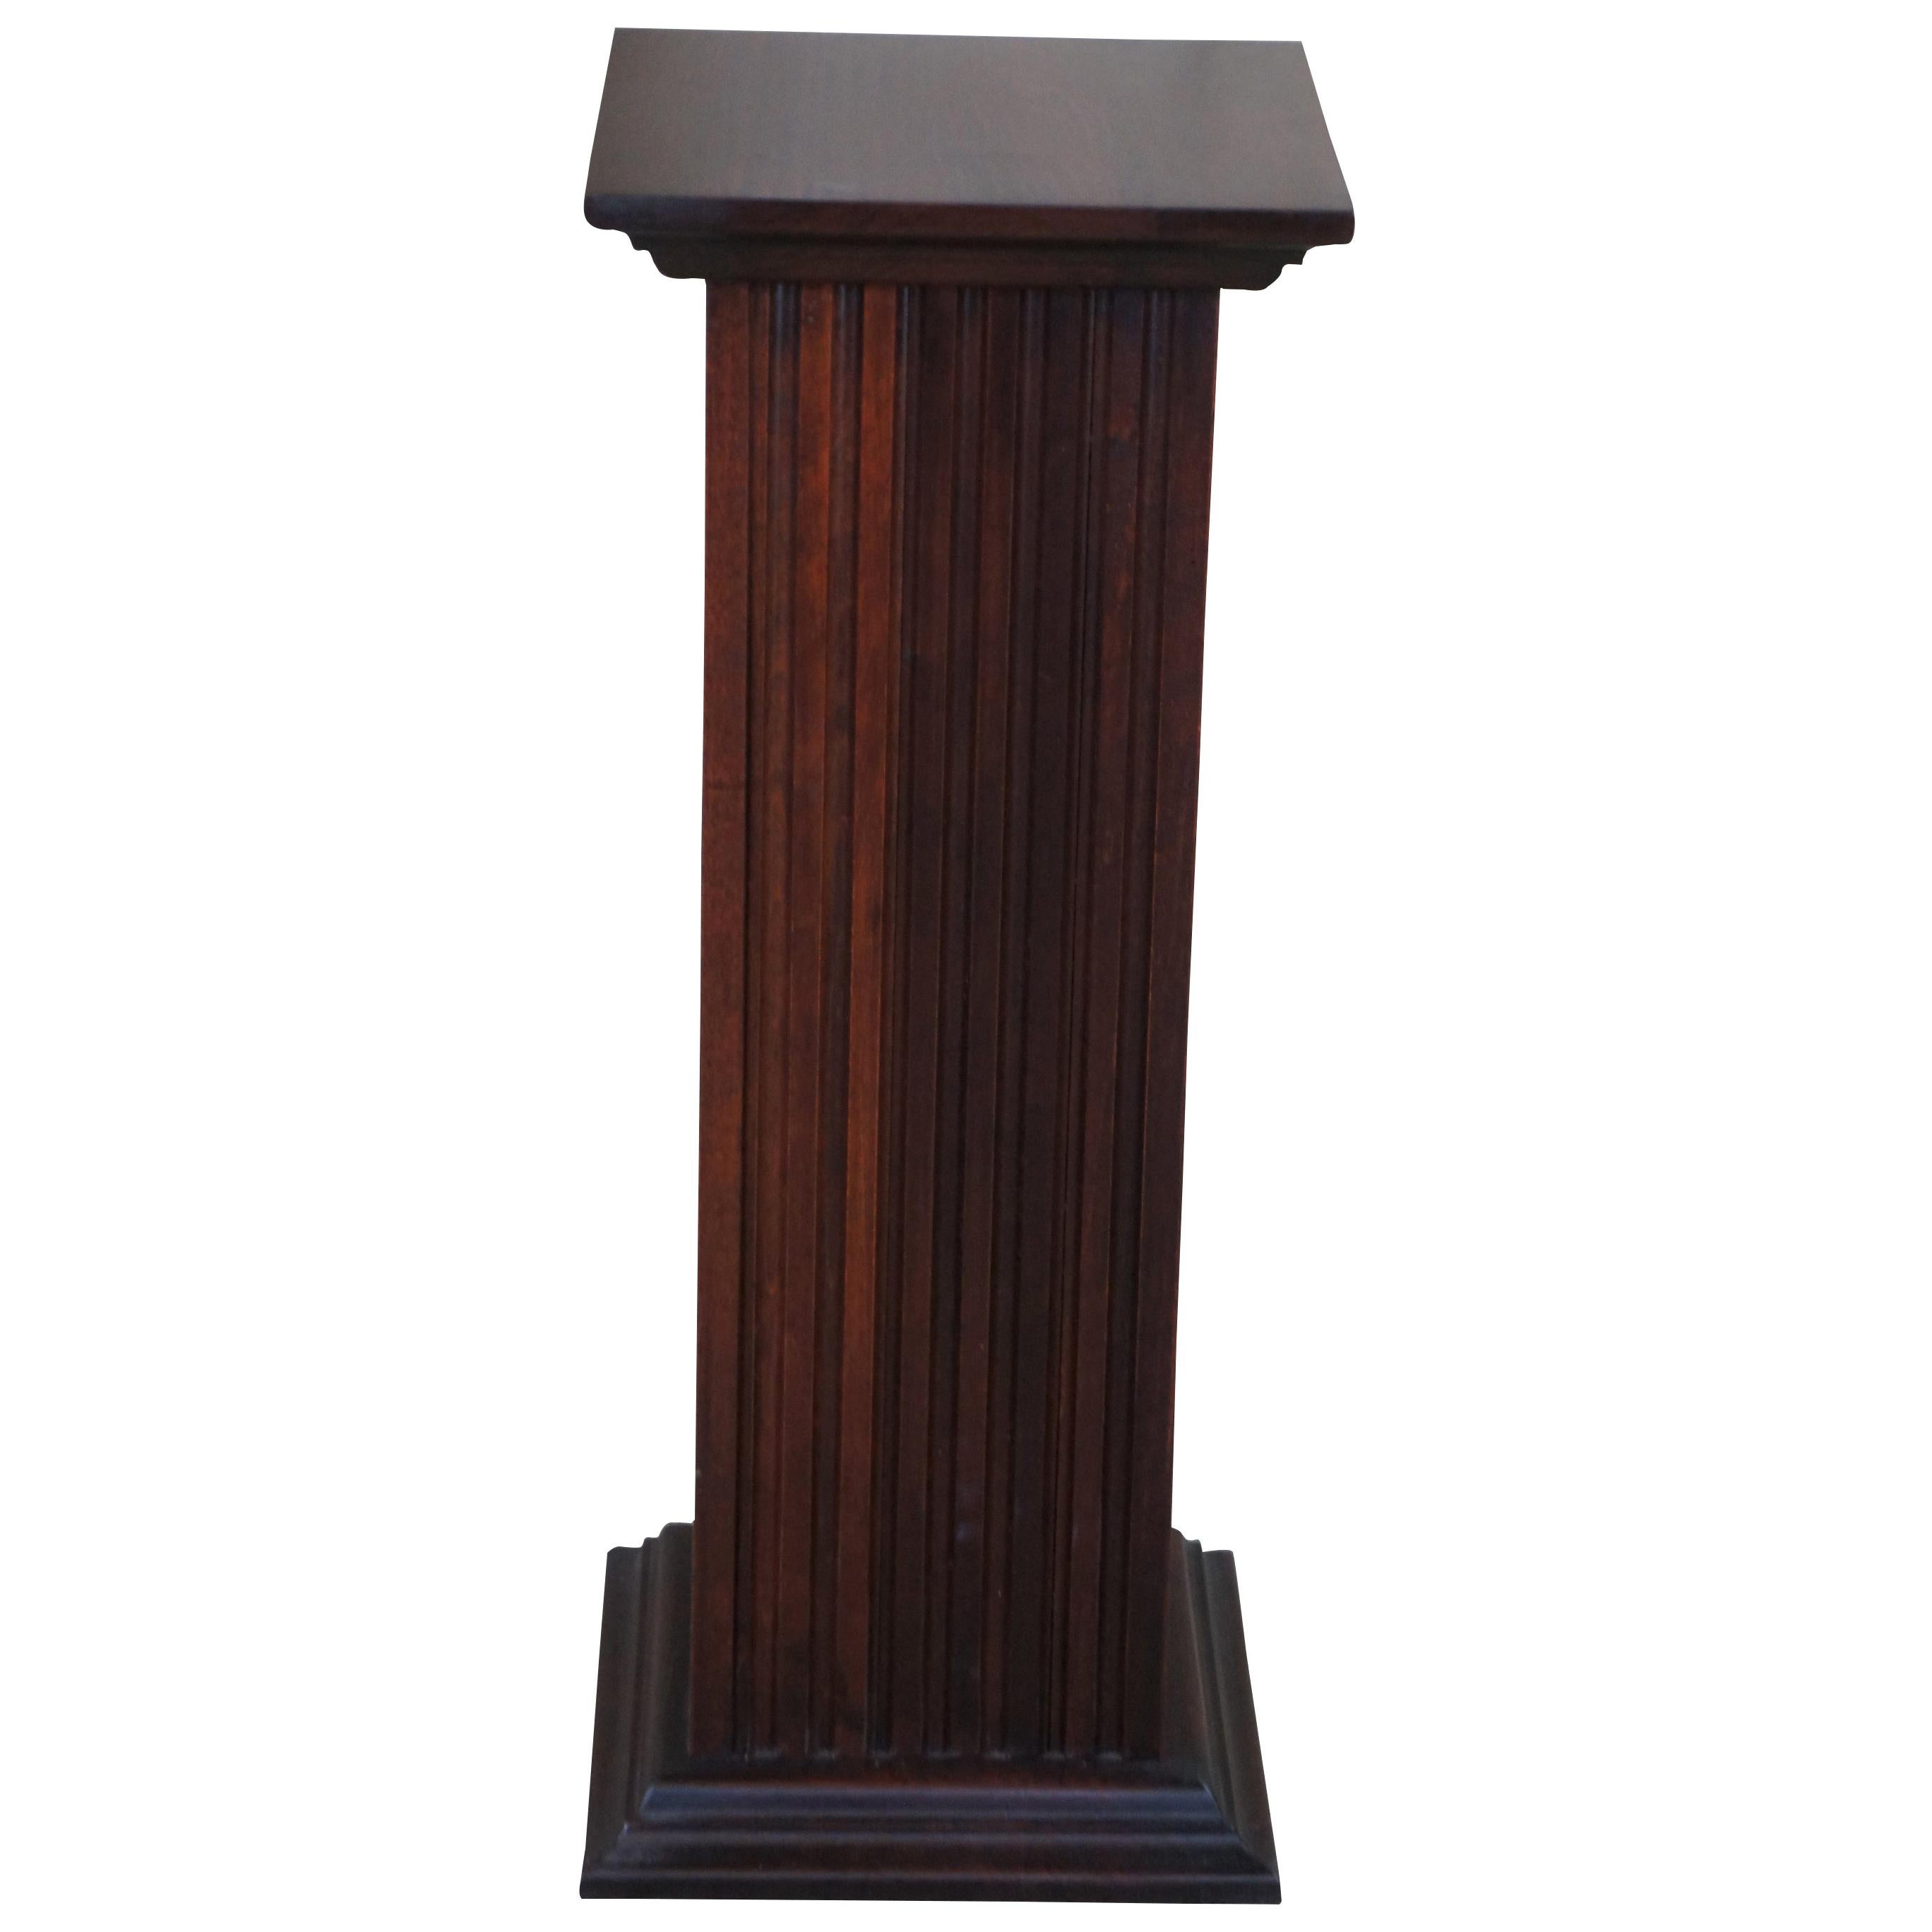 Traditional Mahogany Finished Square Column Pedestal Plant Stand Display